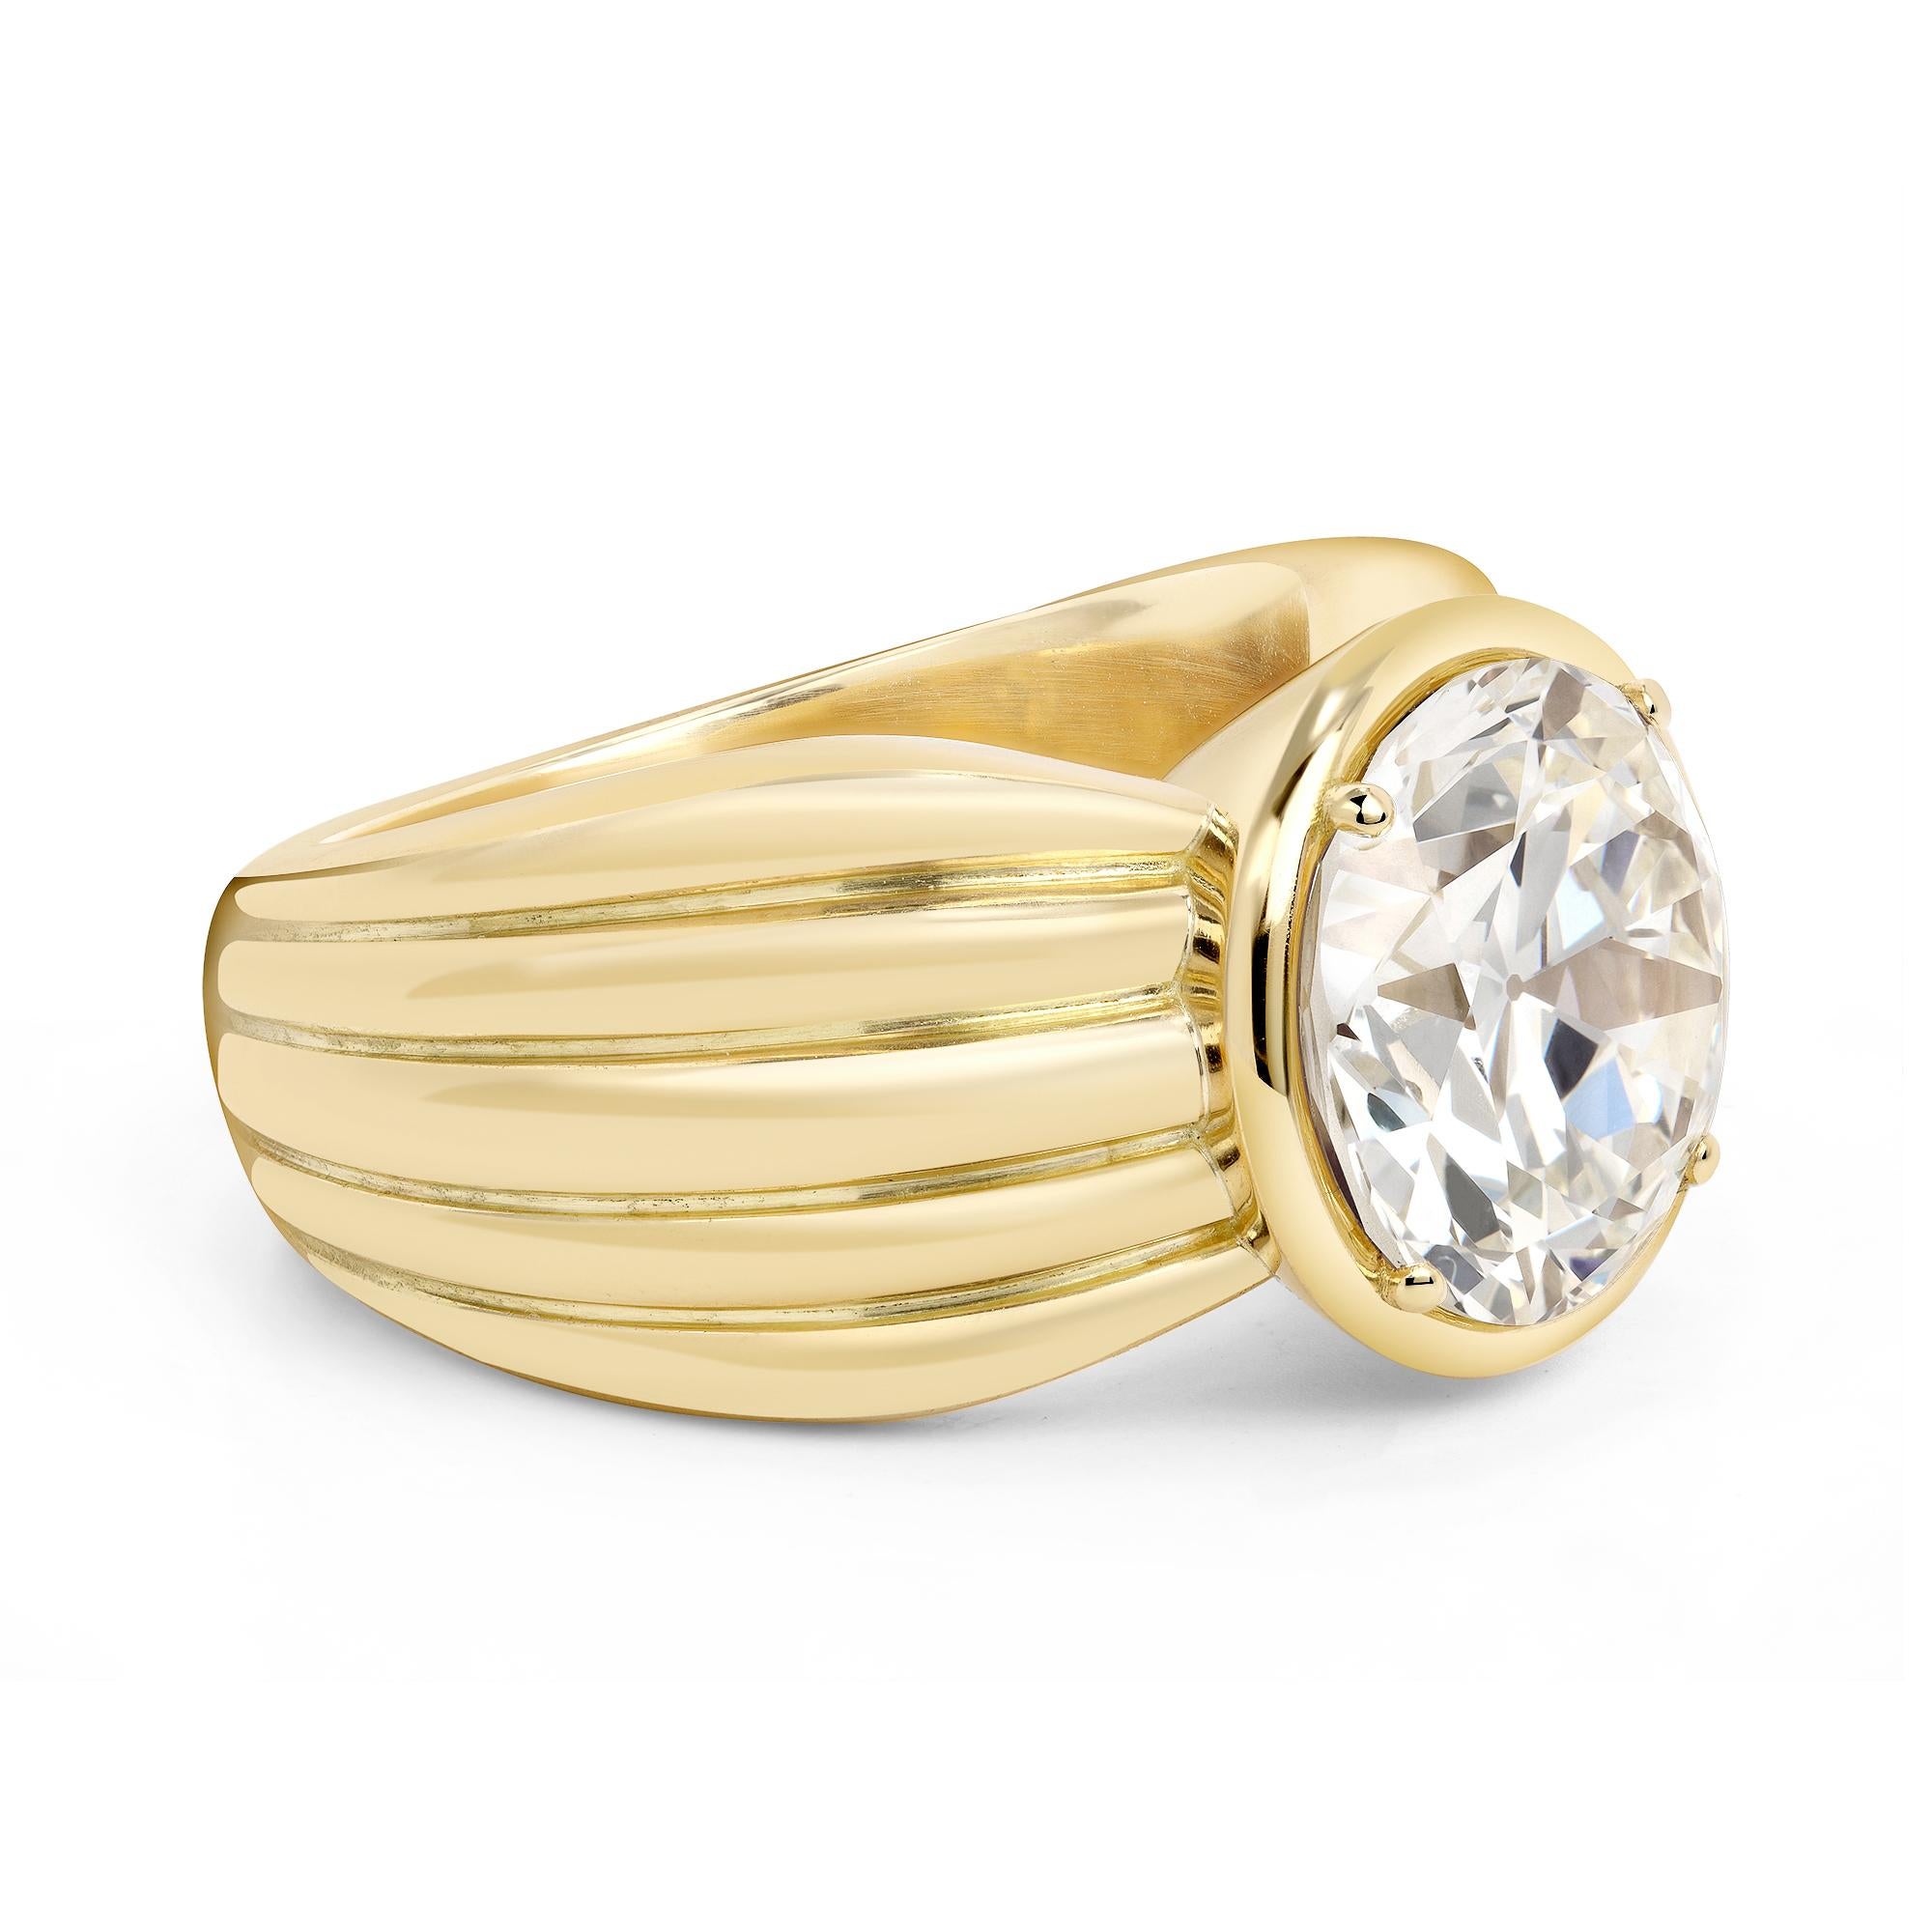 4.74ct N/VS2 GIA certified old European cut diamond prong set in a handcrafted 18K yellow gold mounting.